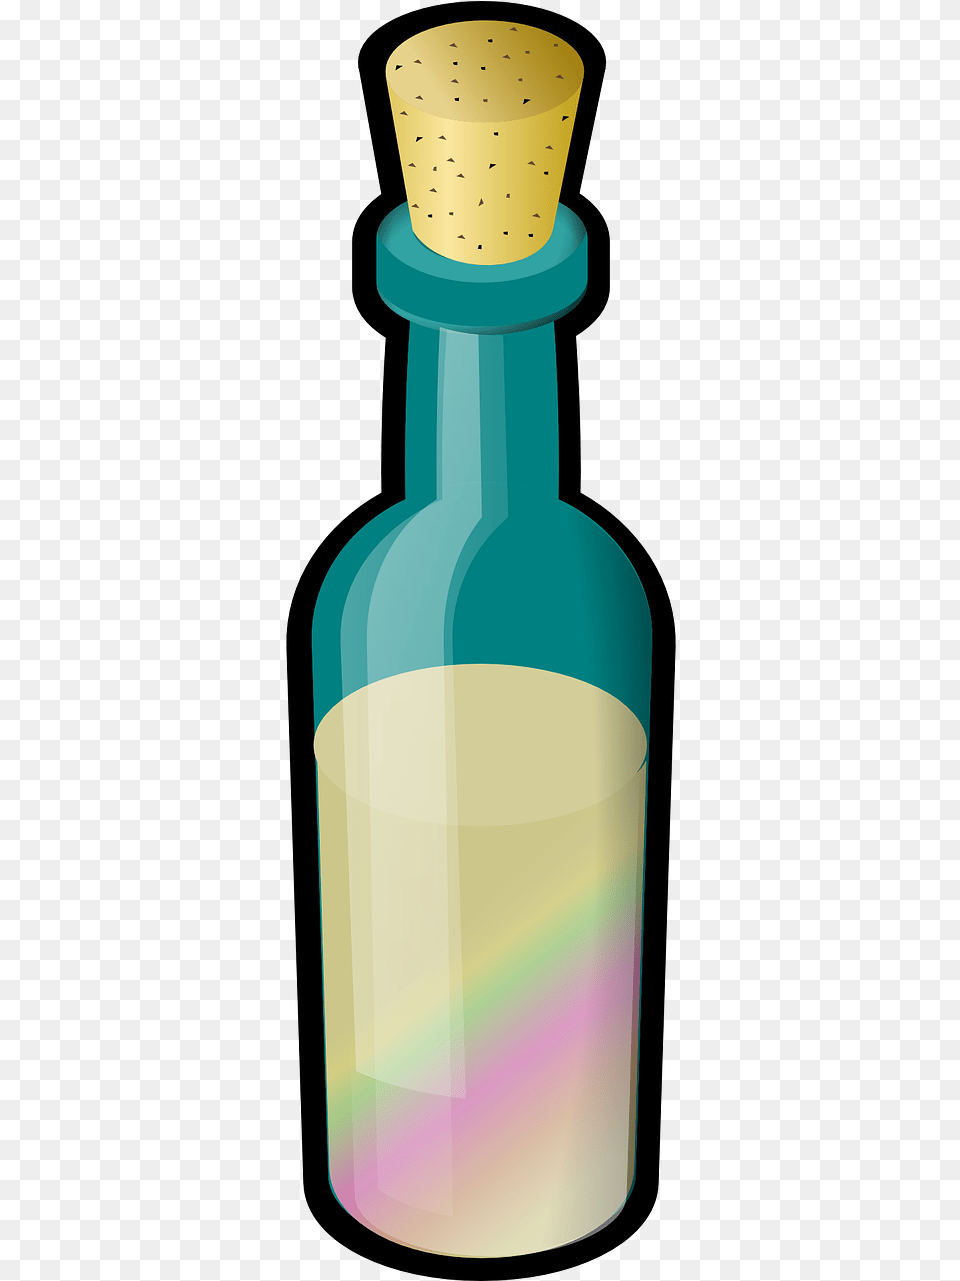 Bottle With Cork Clipart, Cosmetics, Perfume Free Png